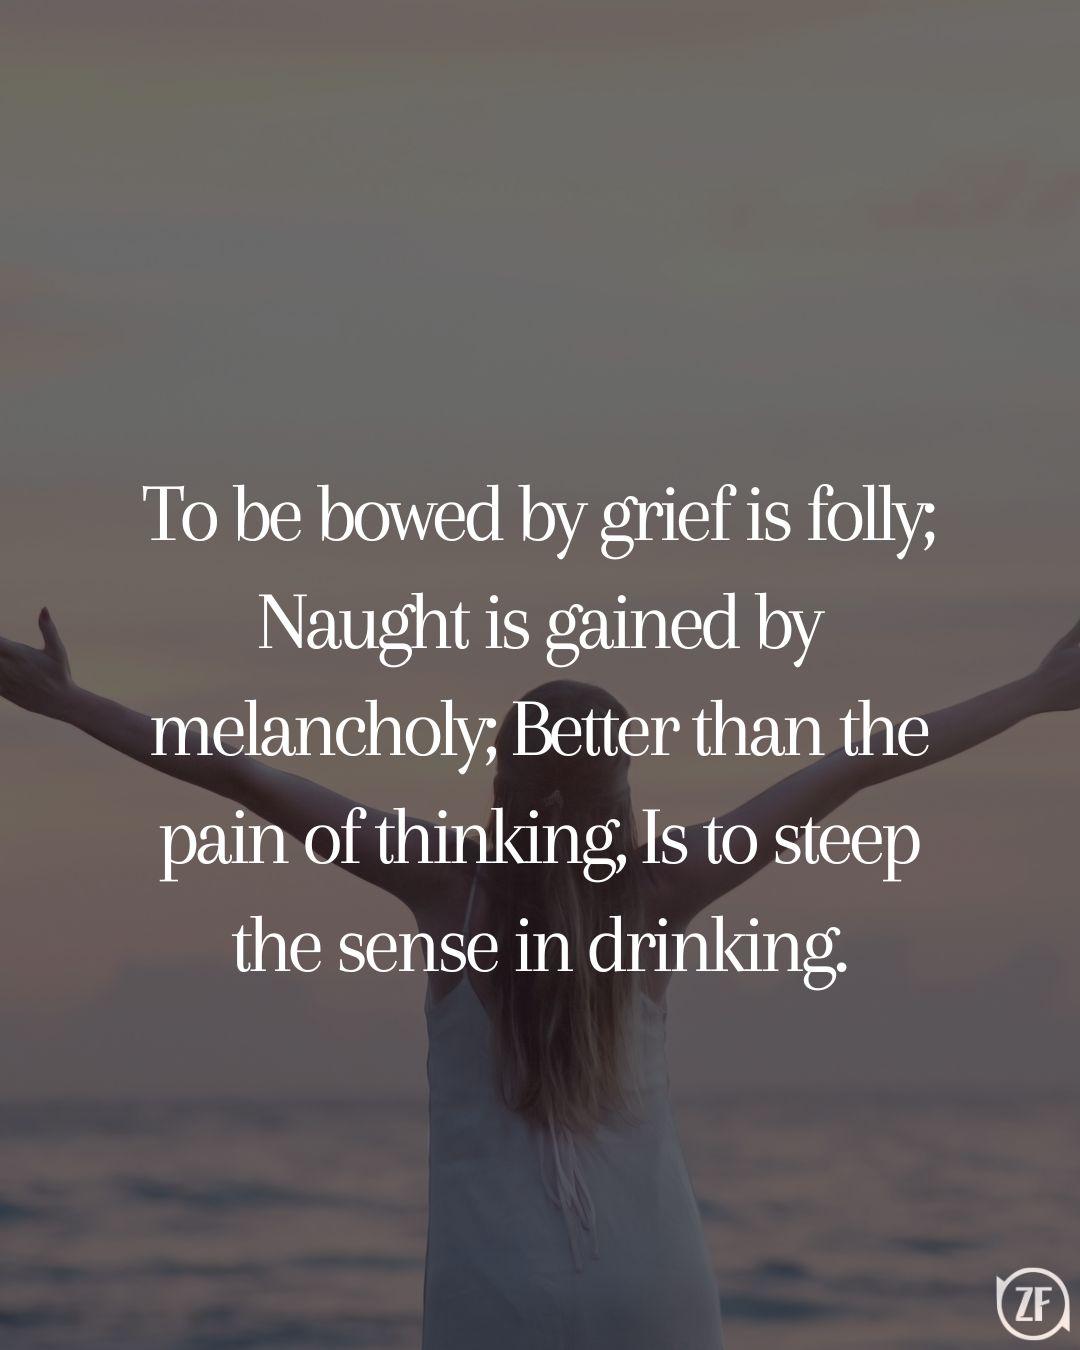 To be bowed by grief is folly; Naught is gained by melancholy; Better than the pain of thinking, Is to steep the sense in drinking.